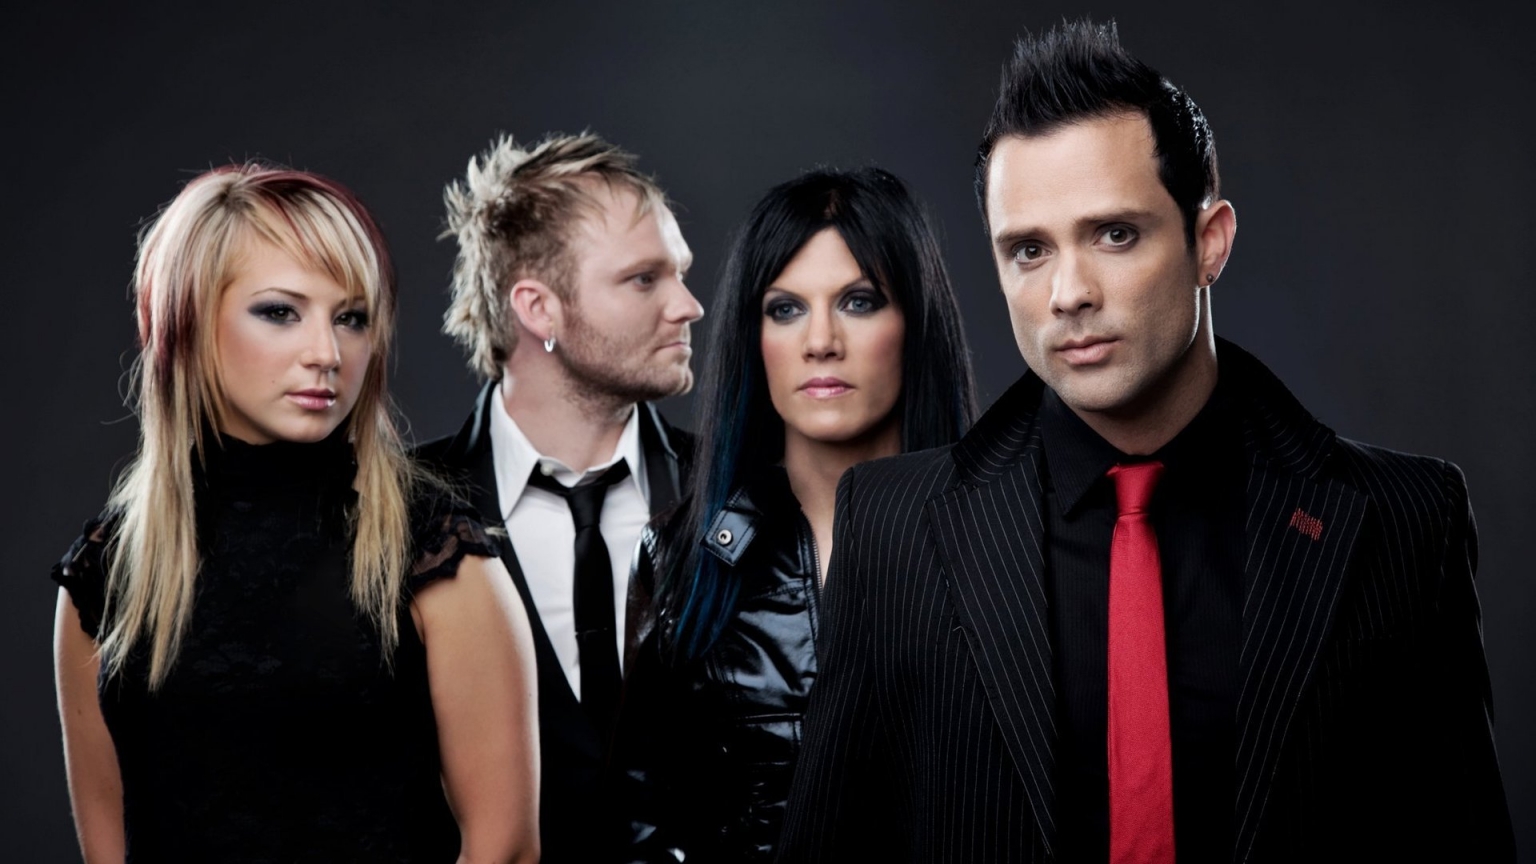 Skillet Band Members for 1536 x 864 HDTV resolution